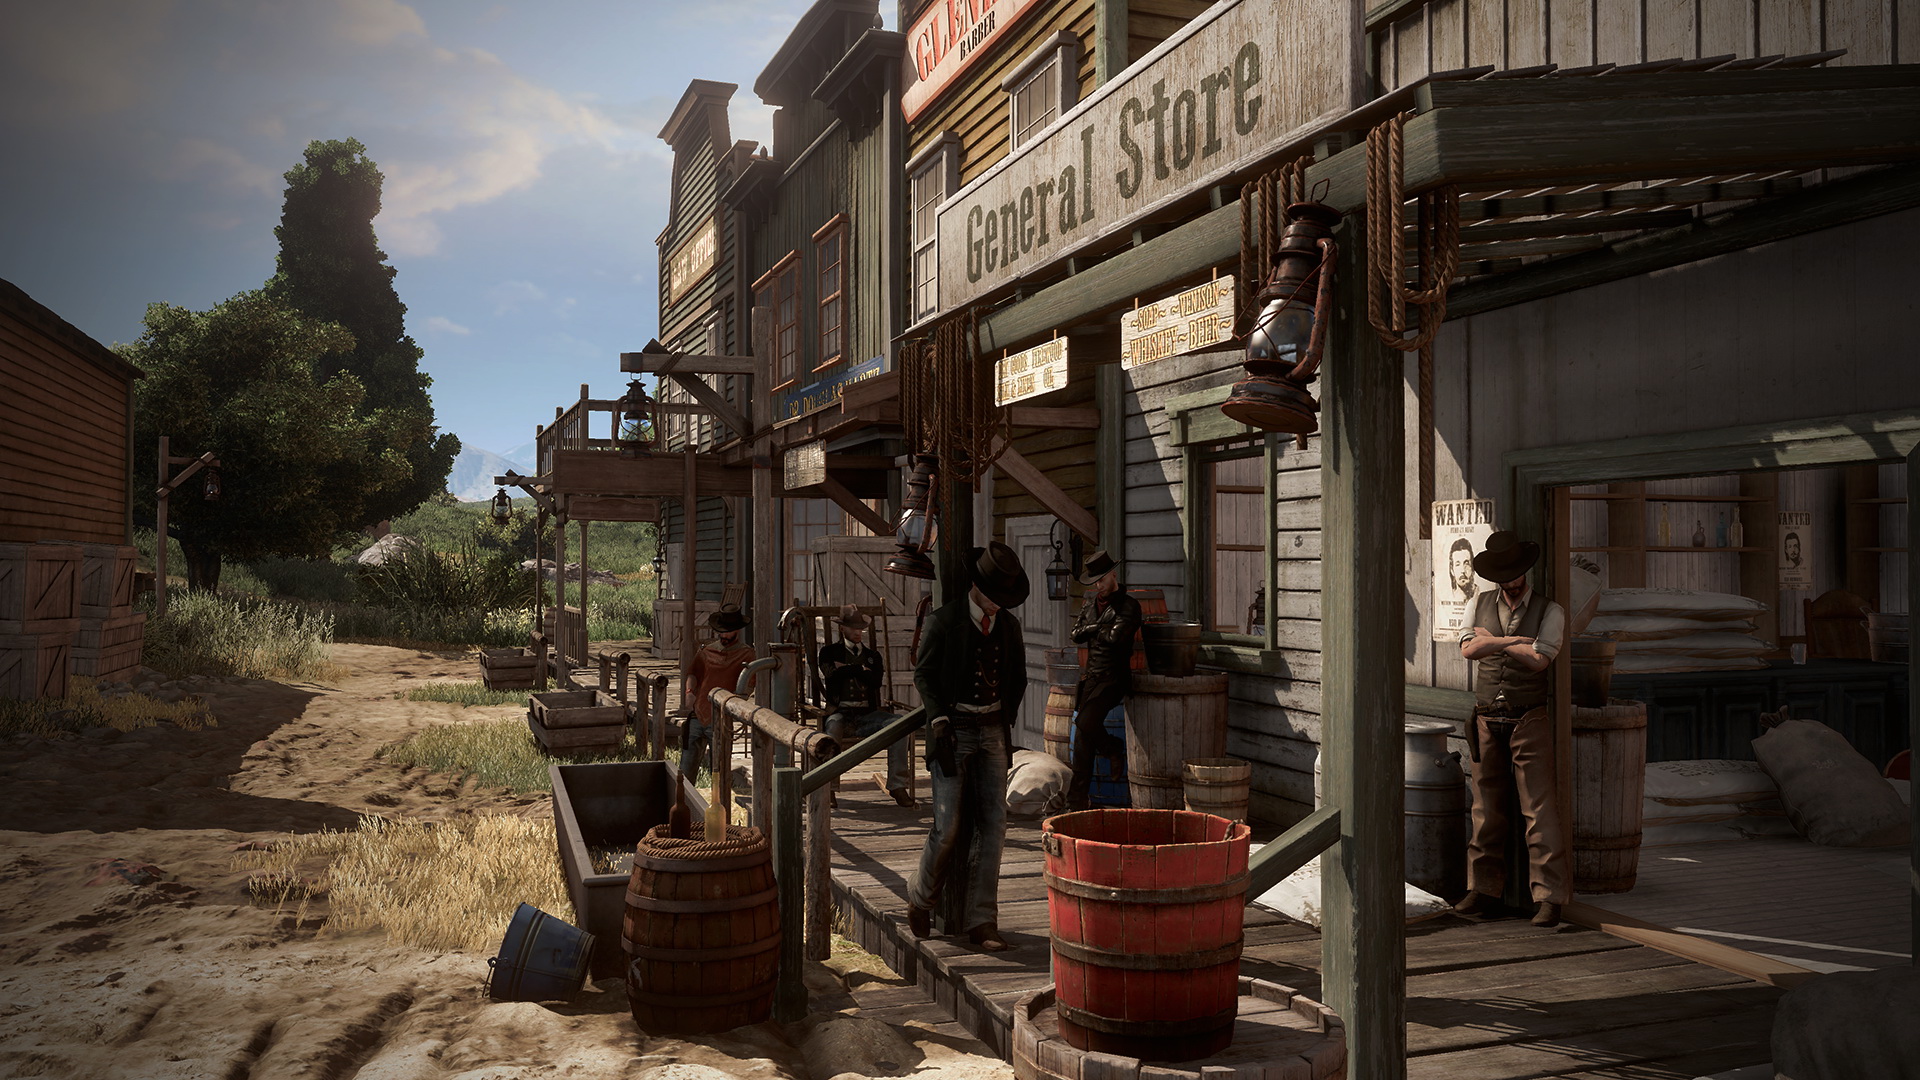 Wild West Critical Strike instal the new version for windows